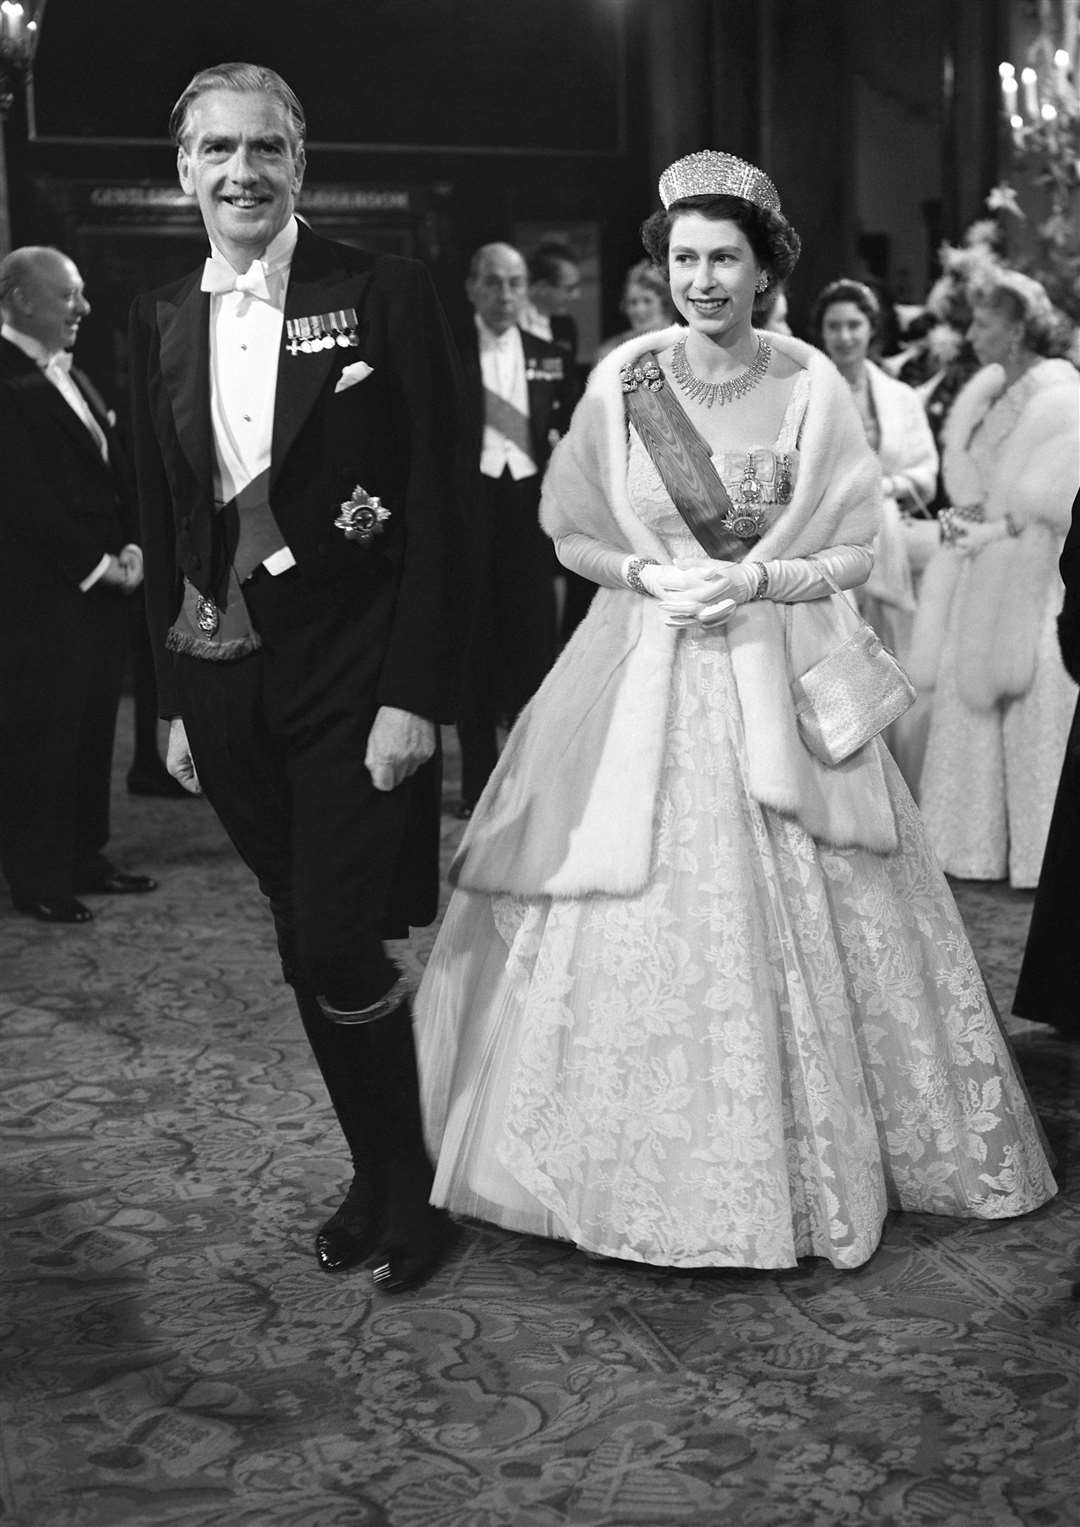 Sir Anthony Eden with the Queen at the Royal Opera House in Covent Garden in 1955 (PA)